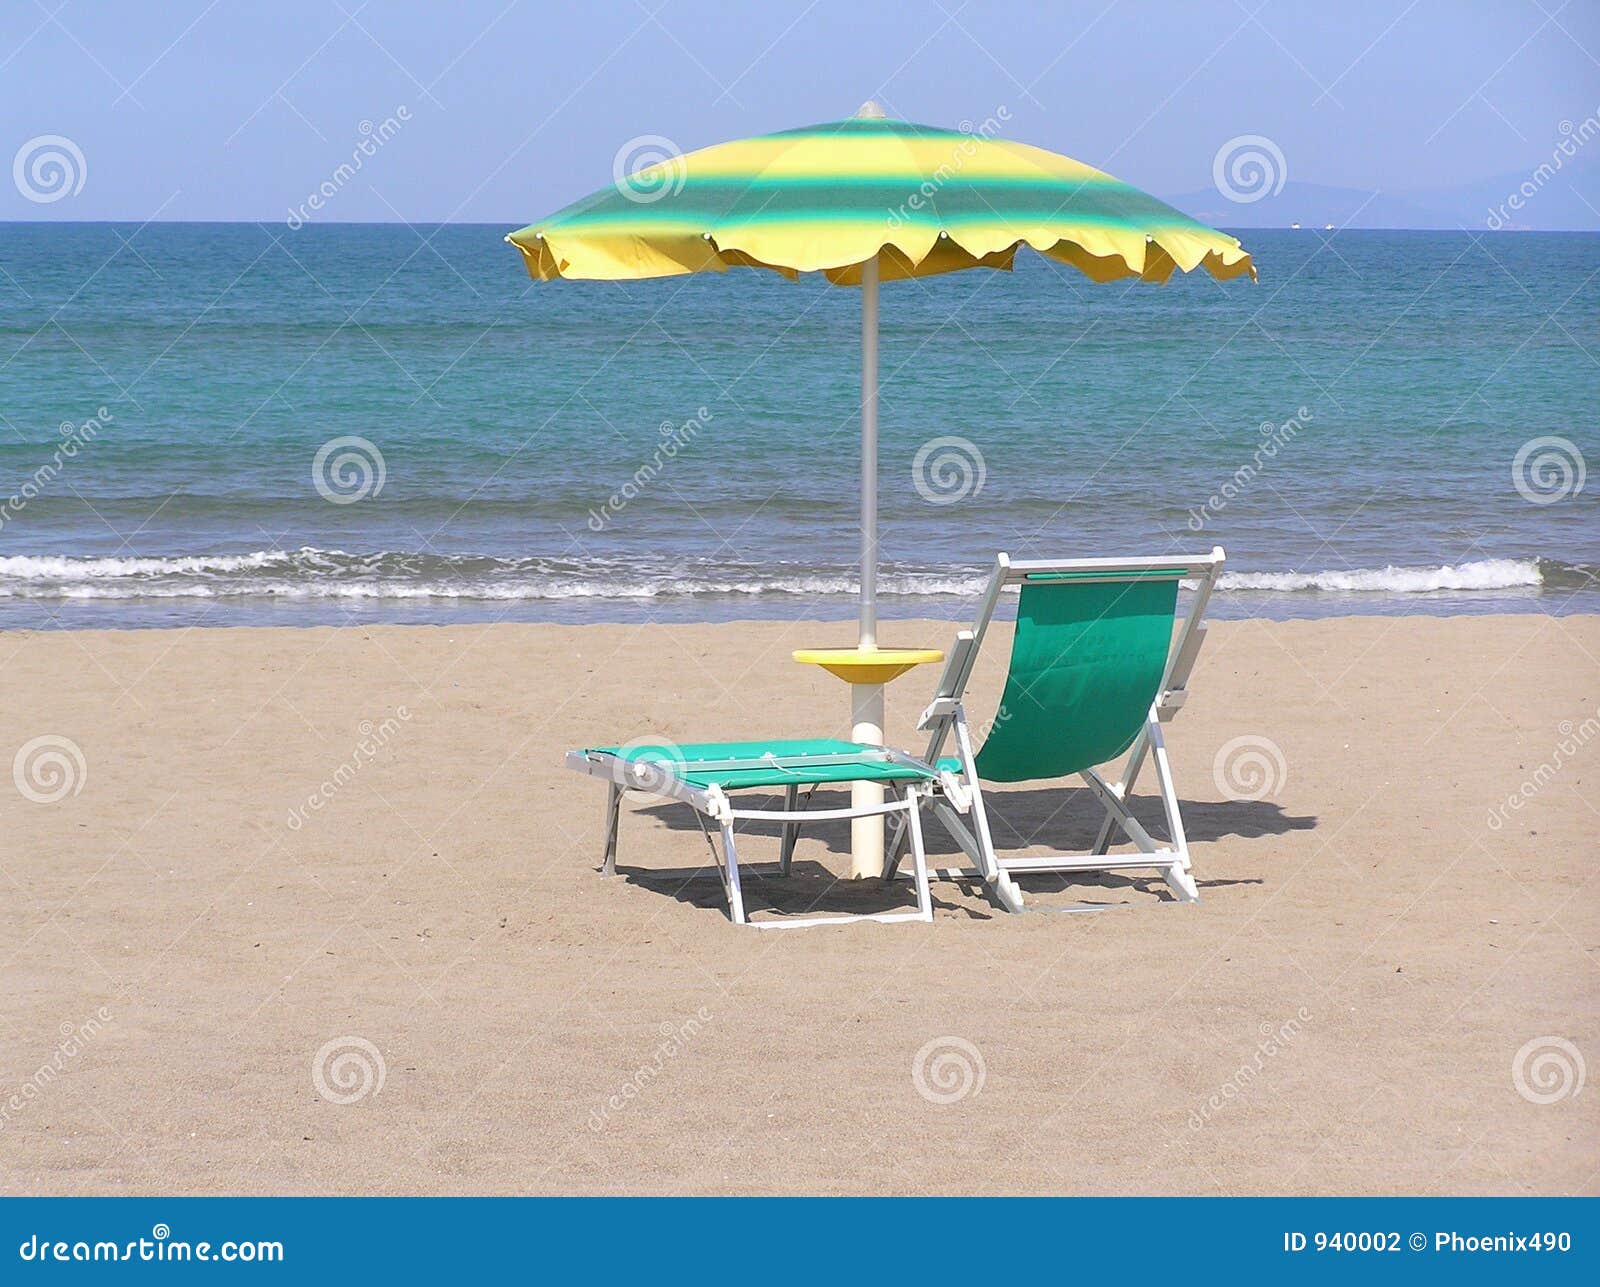 Waiting for the Summer stock photo. Image of seaside, spring - 940002